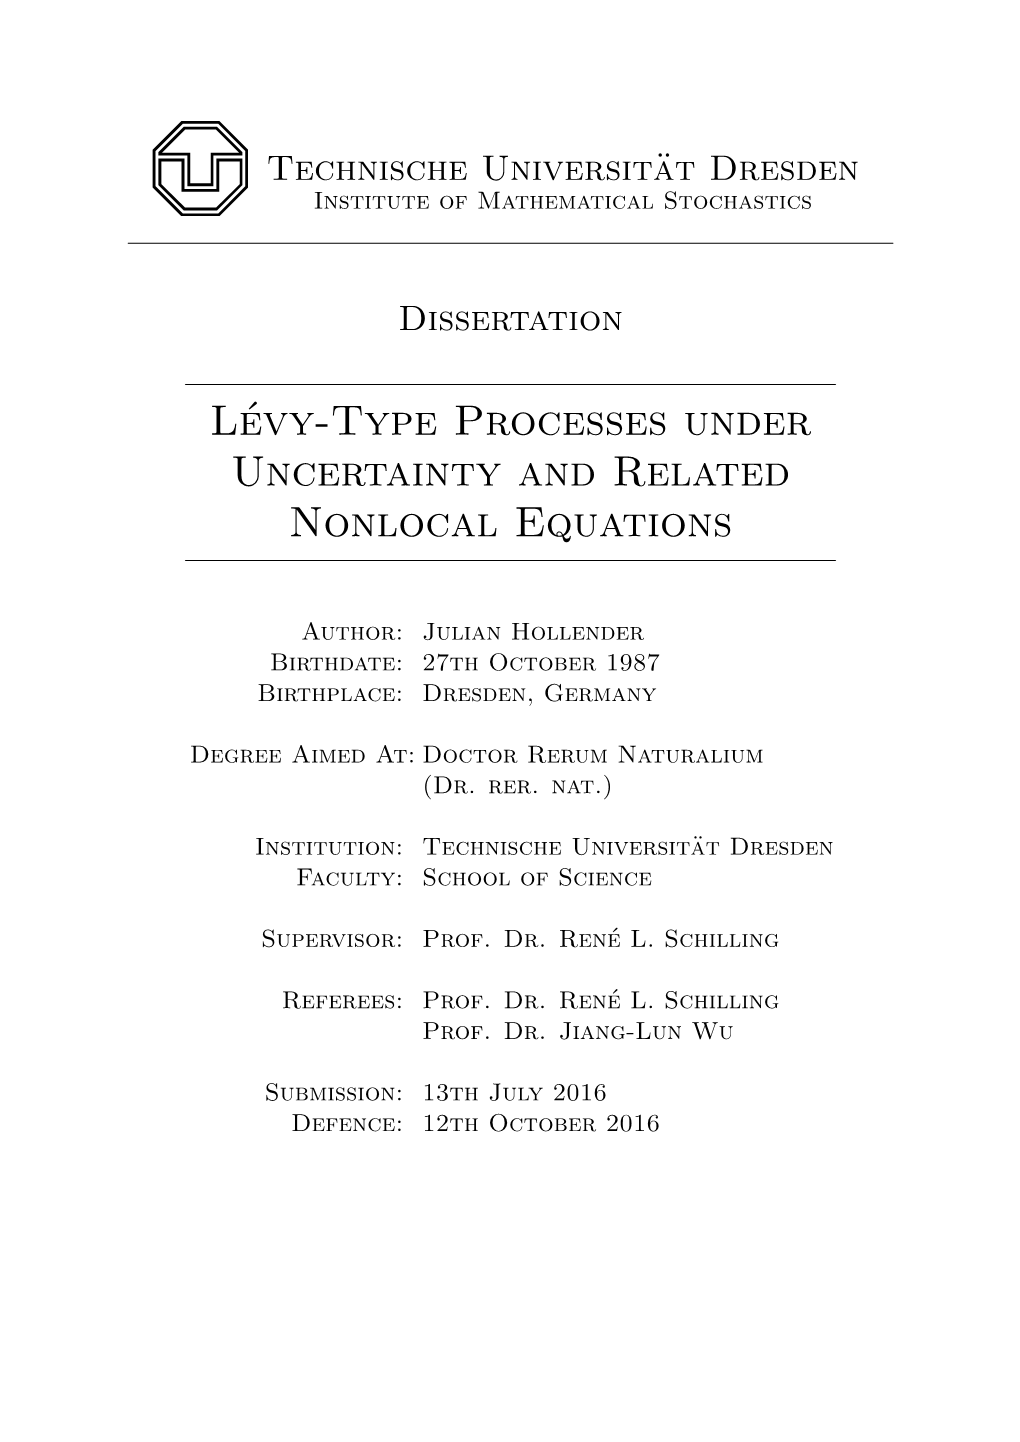 Lévy-Type Processes Under Uncertainty and Related Nonlocal Equations